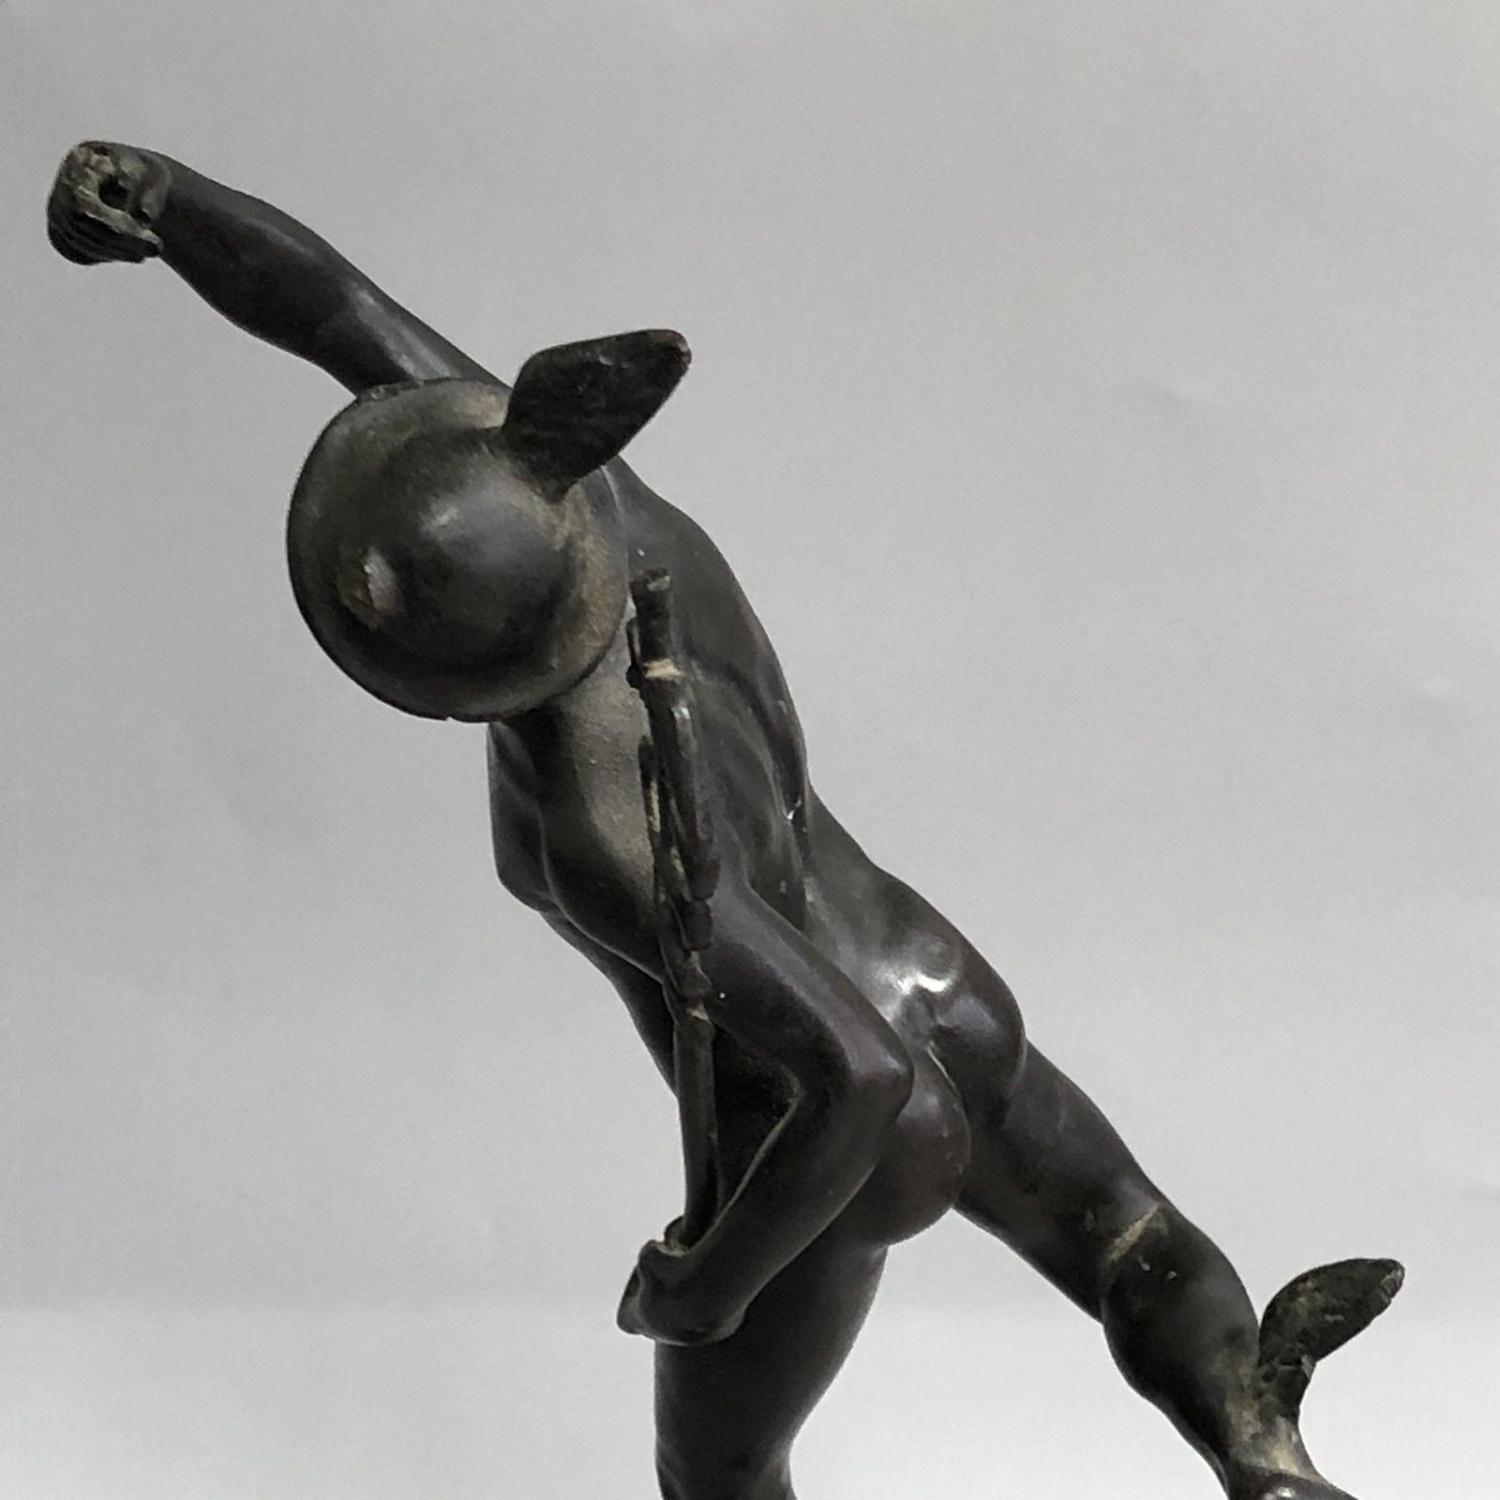 Bronzed Metal Figure of Winged Flying Mercury on Marble Base (after Bologna) - Image 4 of 6